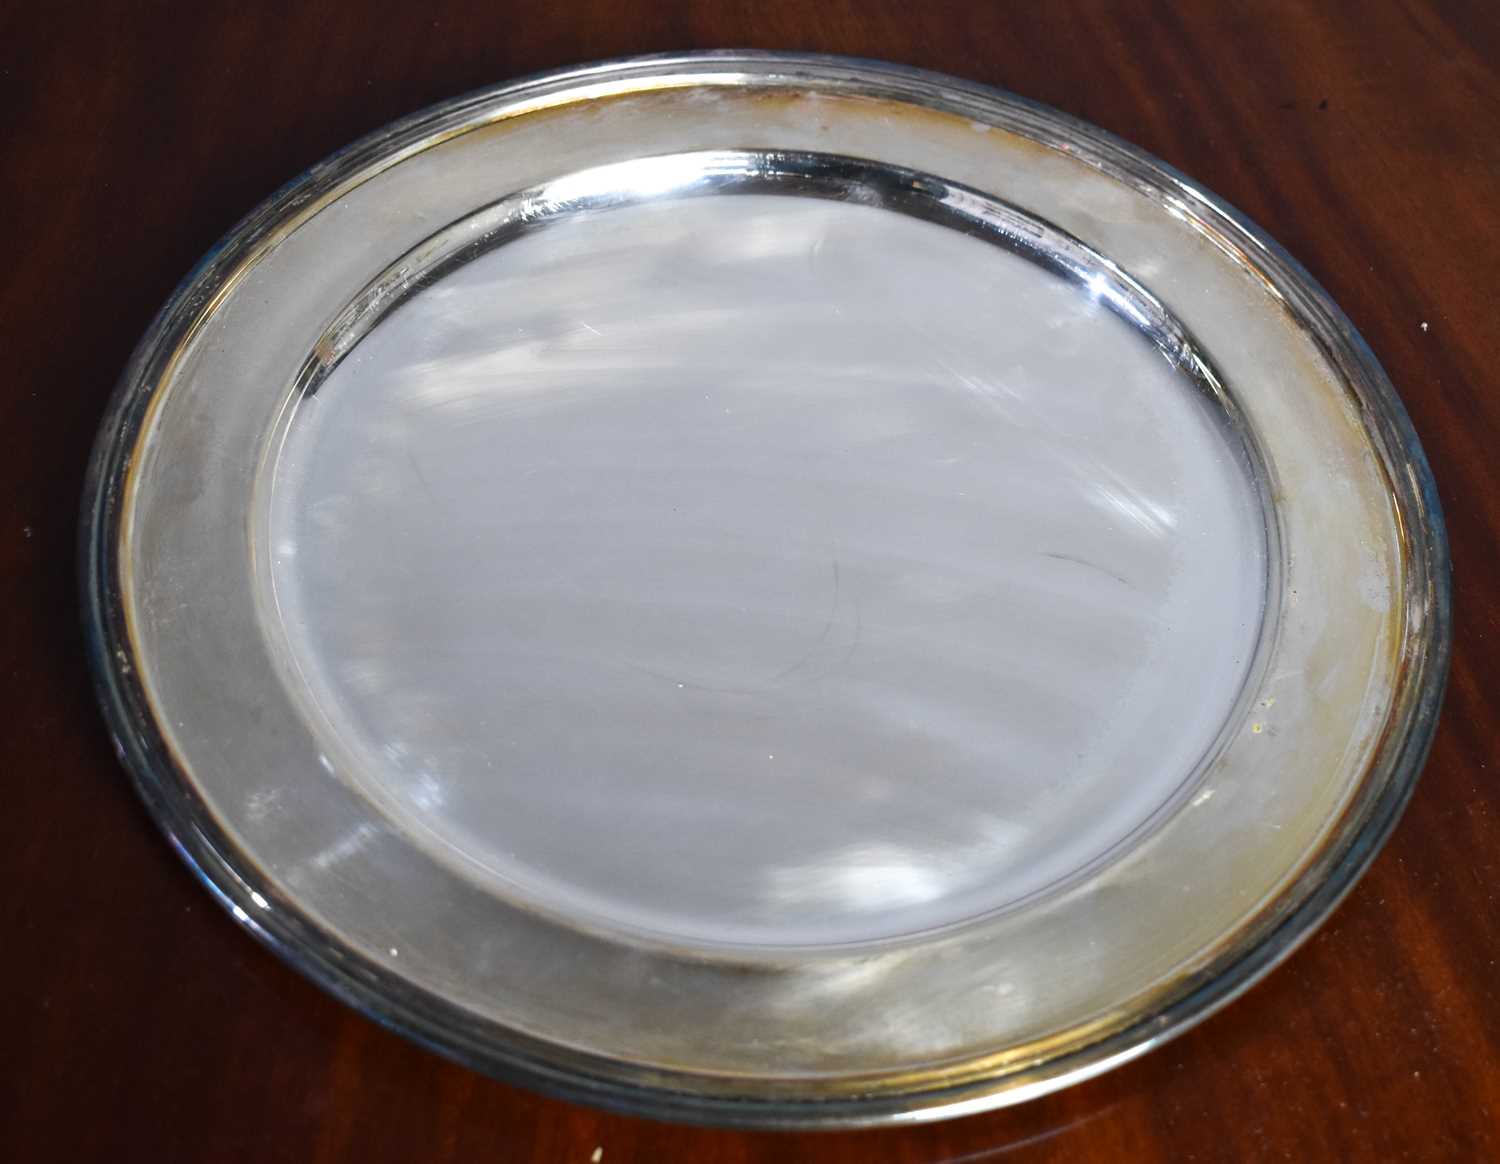 An Italian silver platter, 800 grade, with cheeseboard wooden roundel (removable) seated within